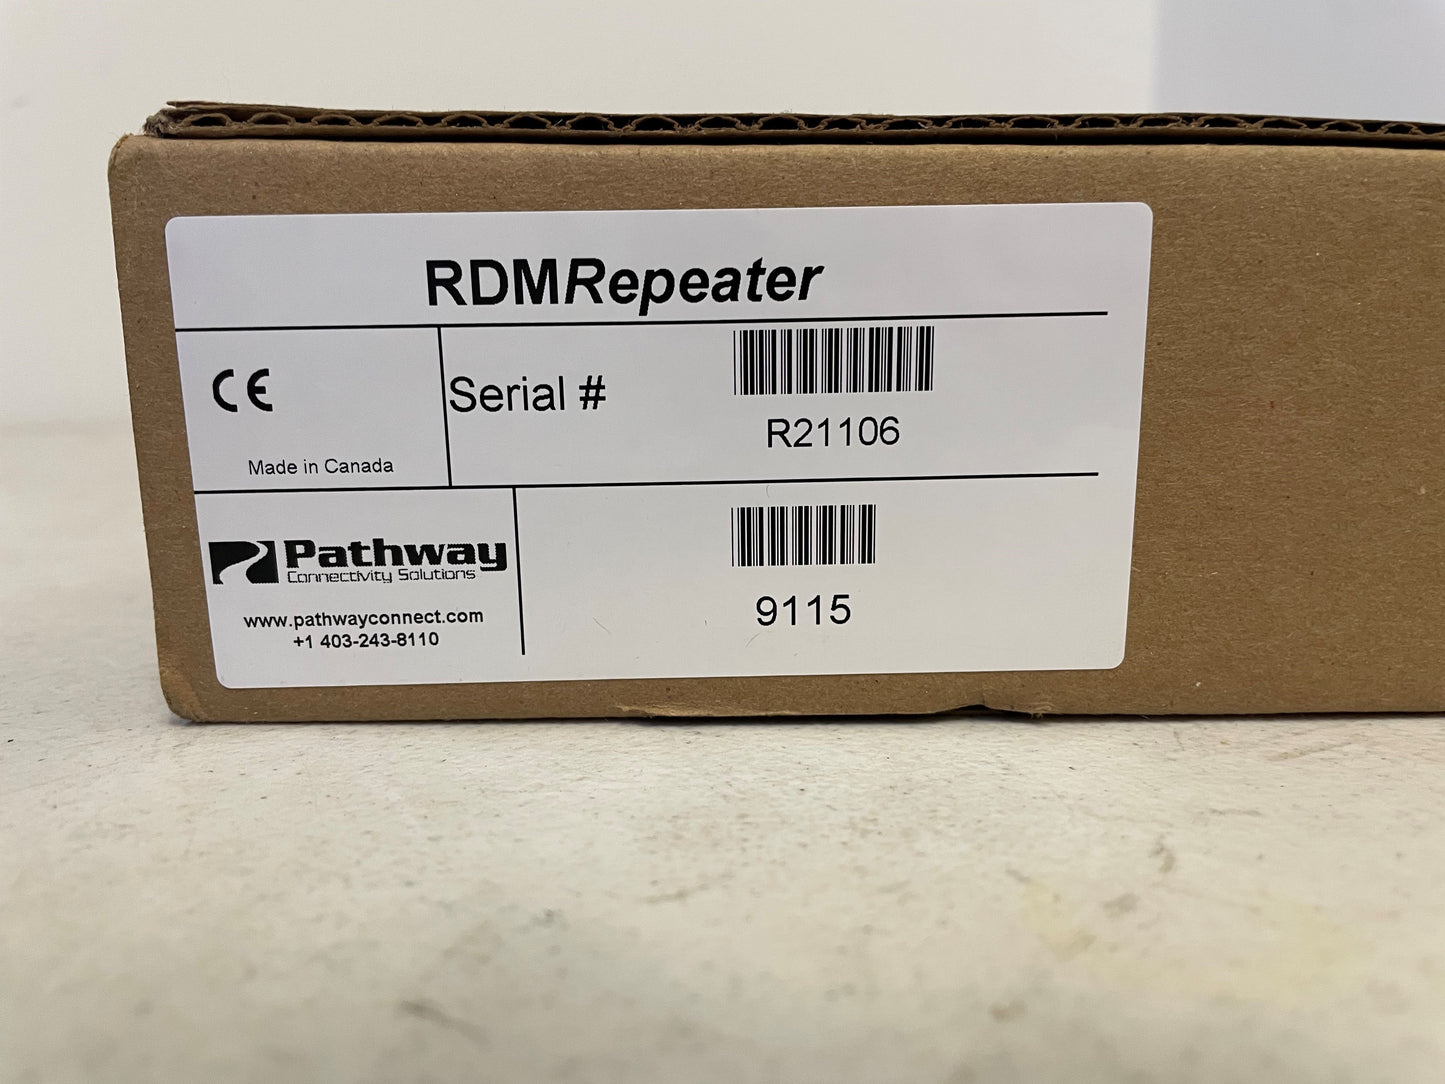 New Pathway DMX Repeater, Pro Series, RDM Equipped, Model 9115, Opened Box for Sale. We Sell Professional Audio Equipment. Audio Systems, Amplifiers, Consoles, Mixers, Electronics, Entertainment, Sound, Live.